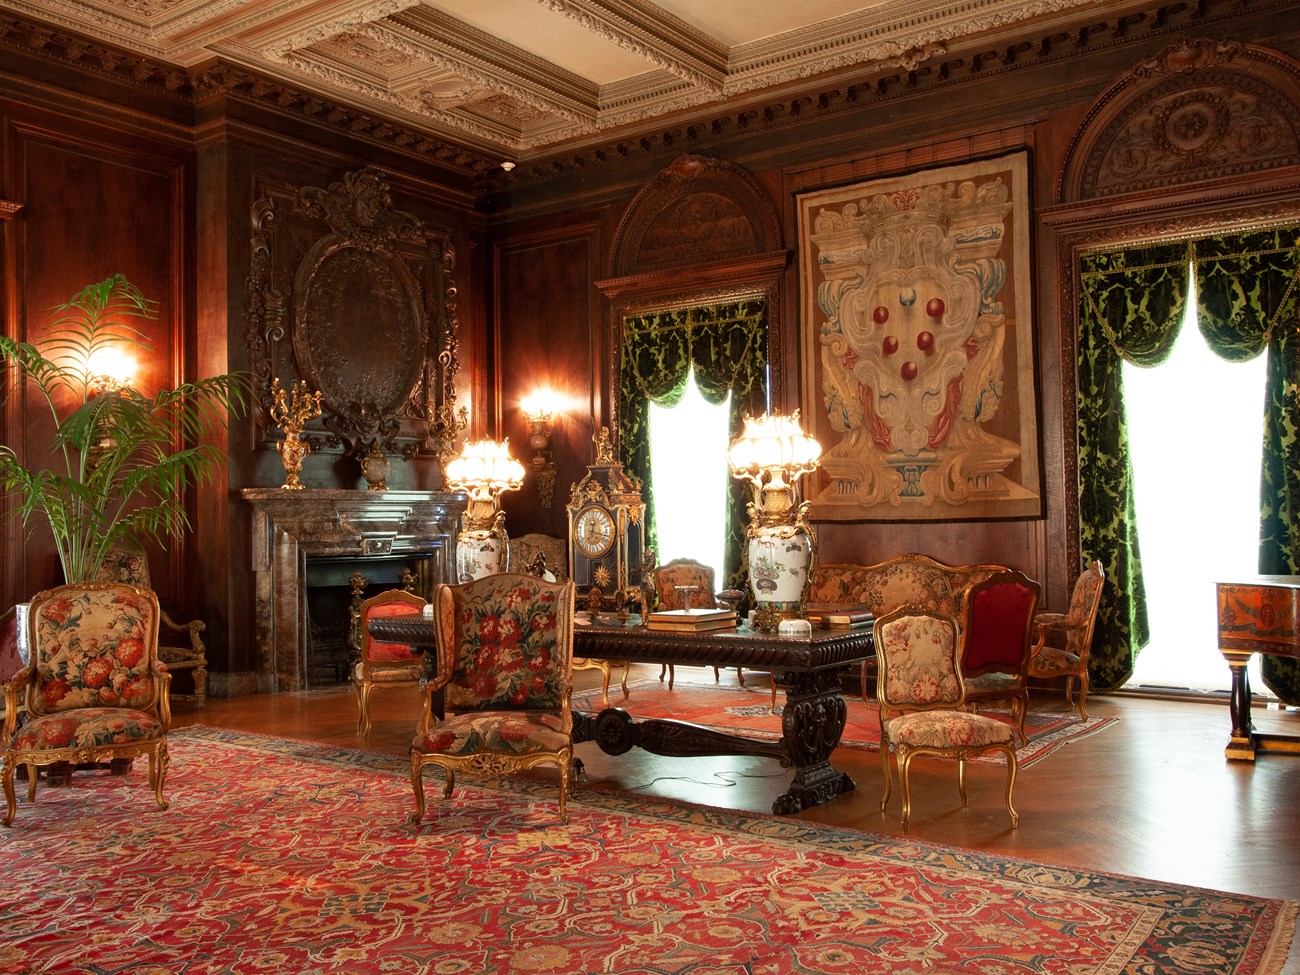 A richly decorated room with tapestries and gilt furniture.